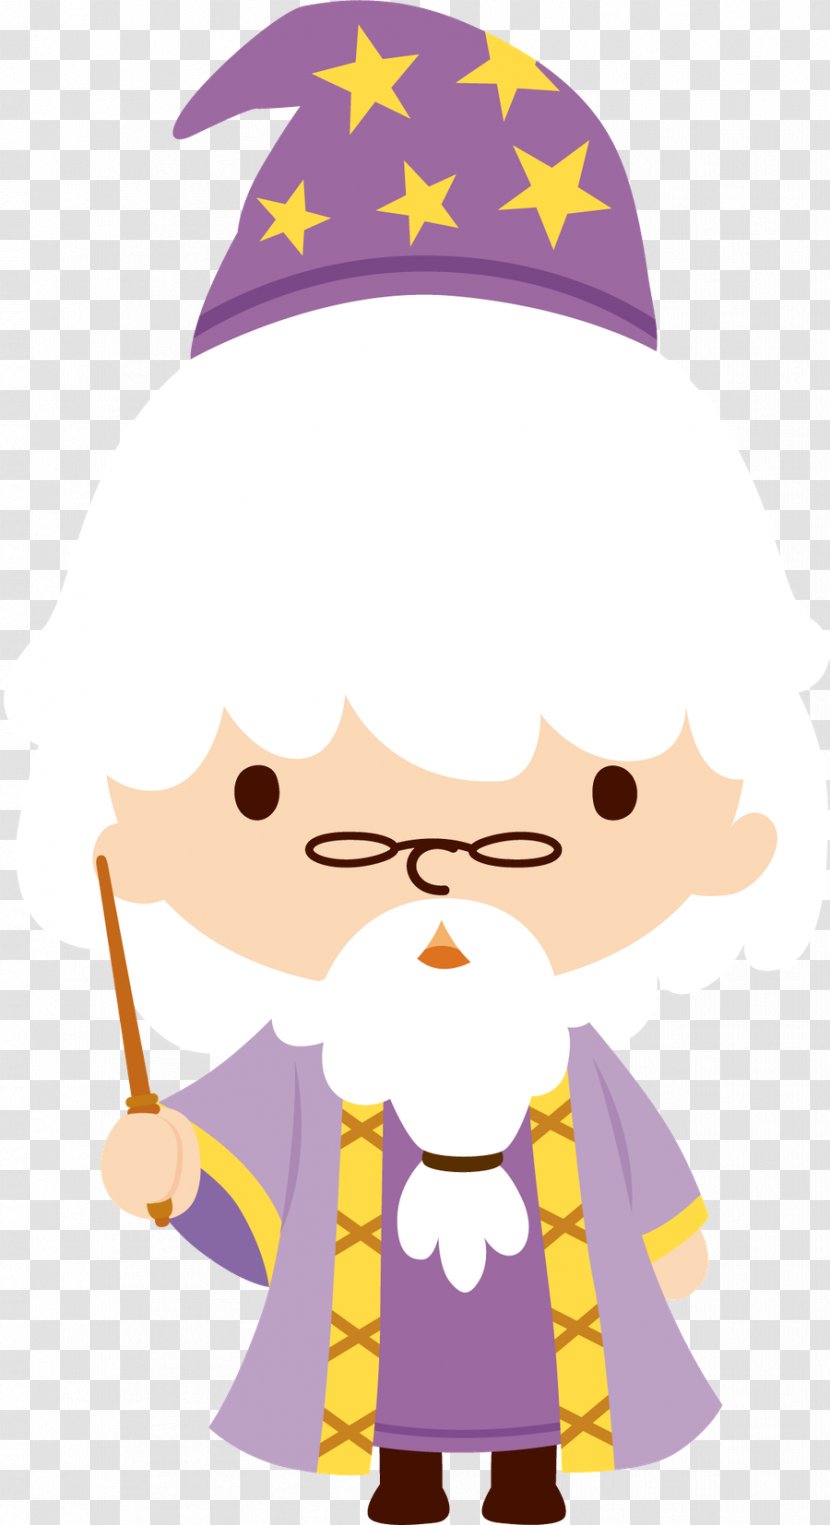 Harry Potter (Literary Series) Professor Albus Dumbledore Clip Art And The Philosopher's Stone - Fictional Character Transparent PNG